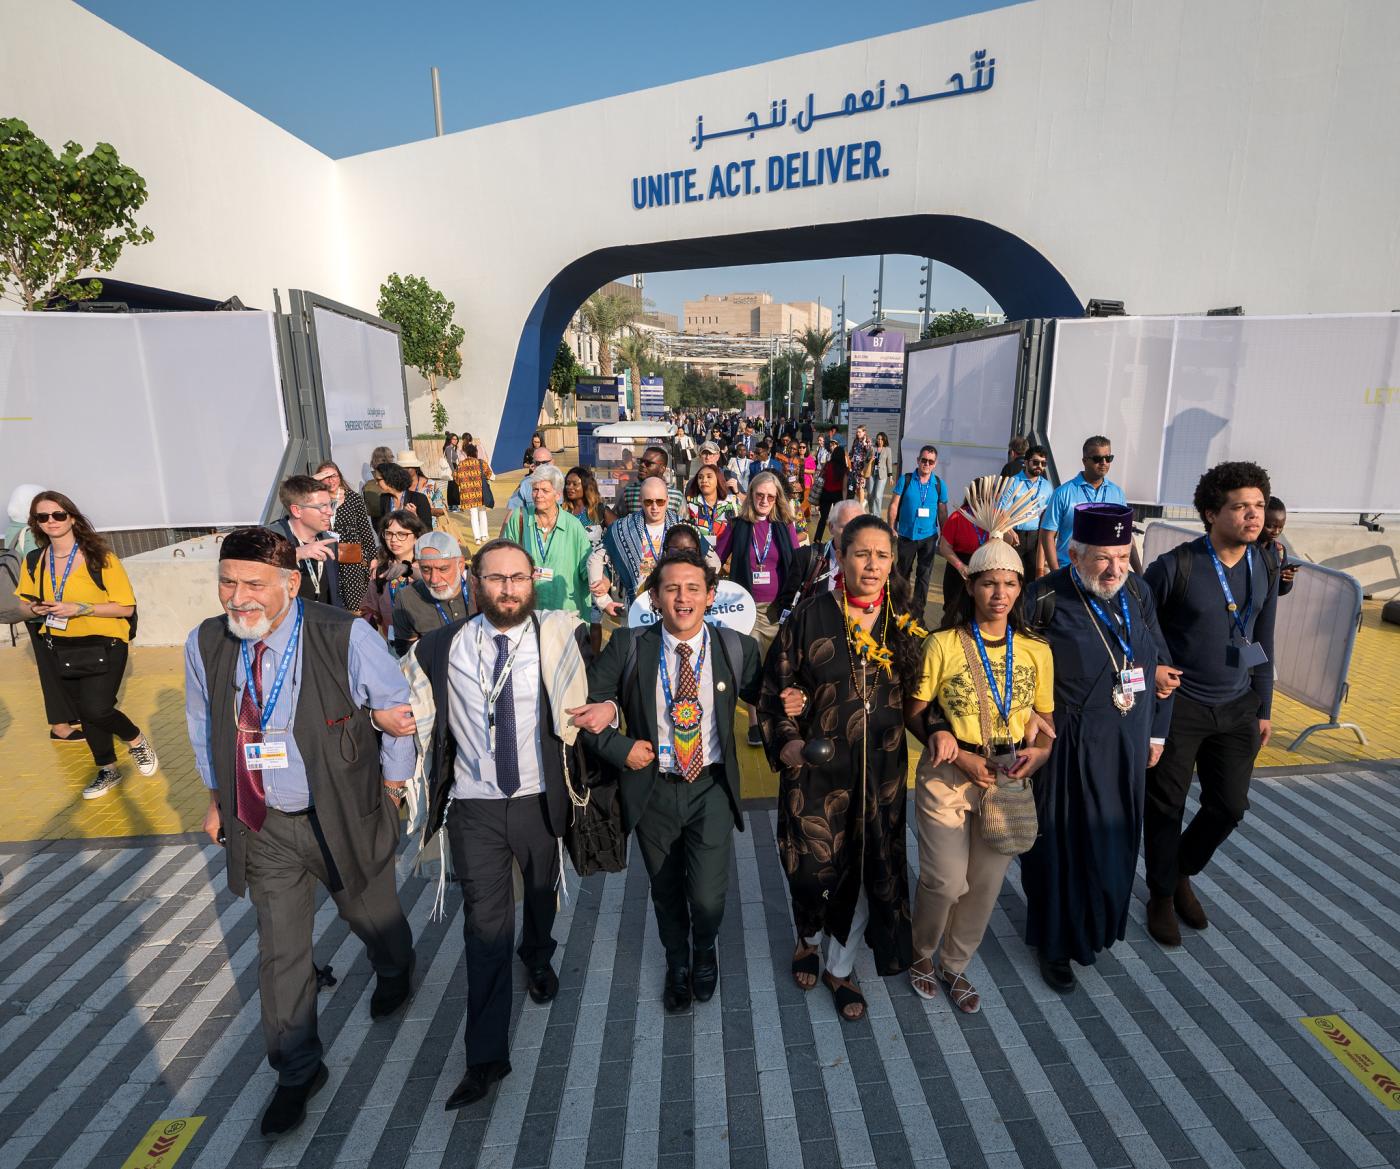 People from a variety of faith traditions gather at the United Nations climate summit COP28